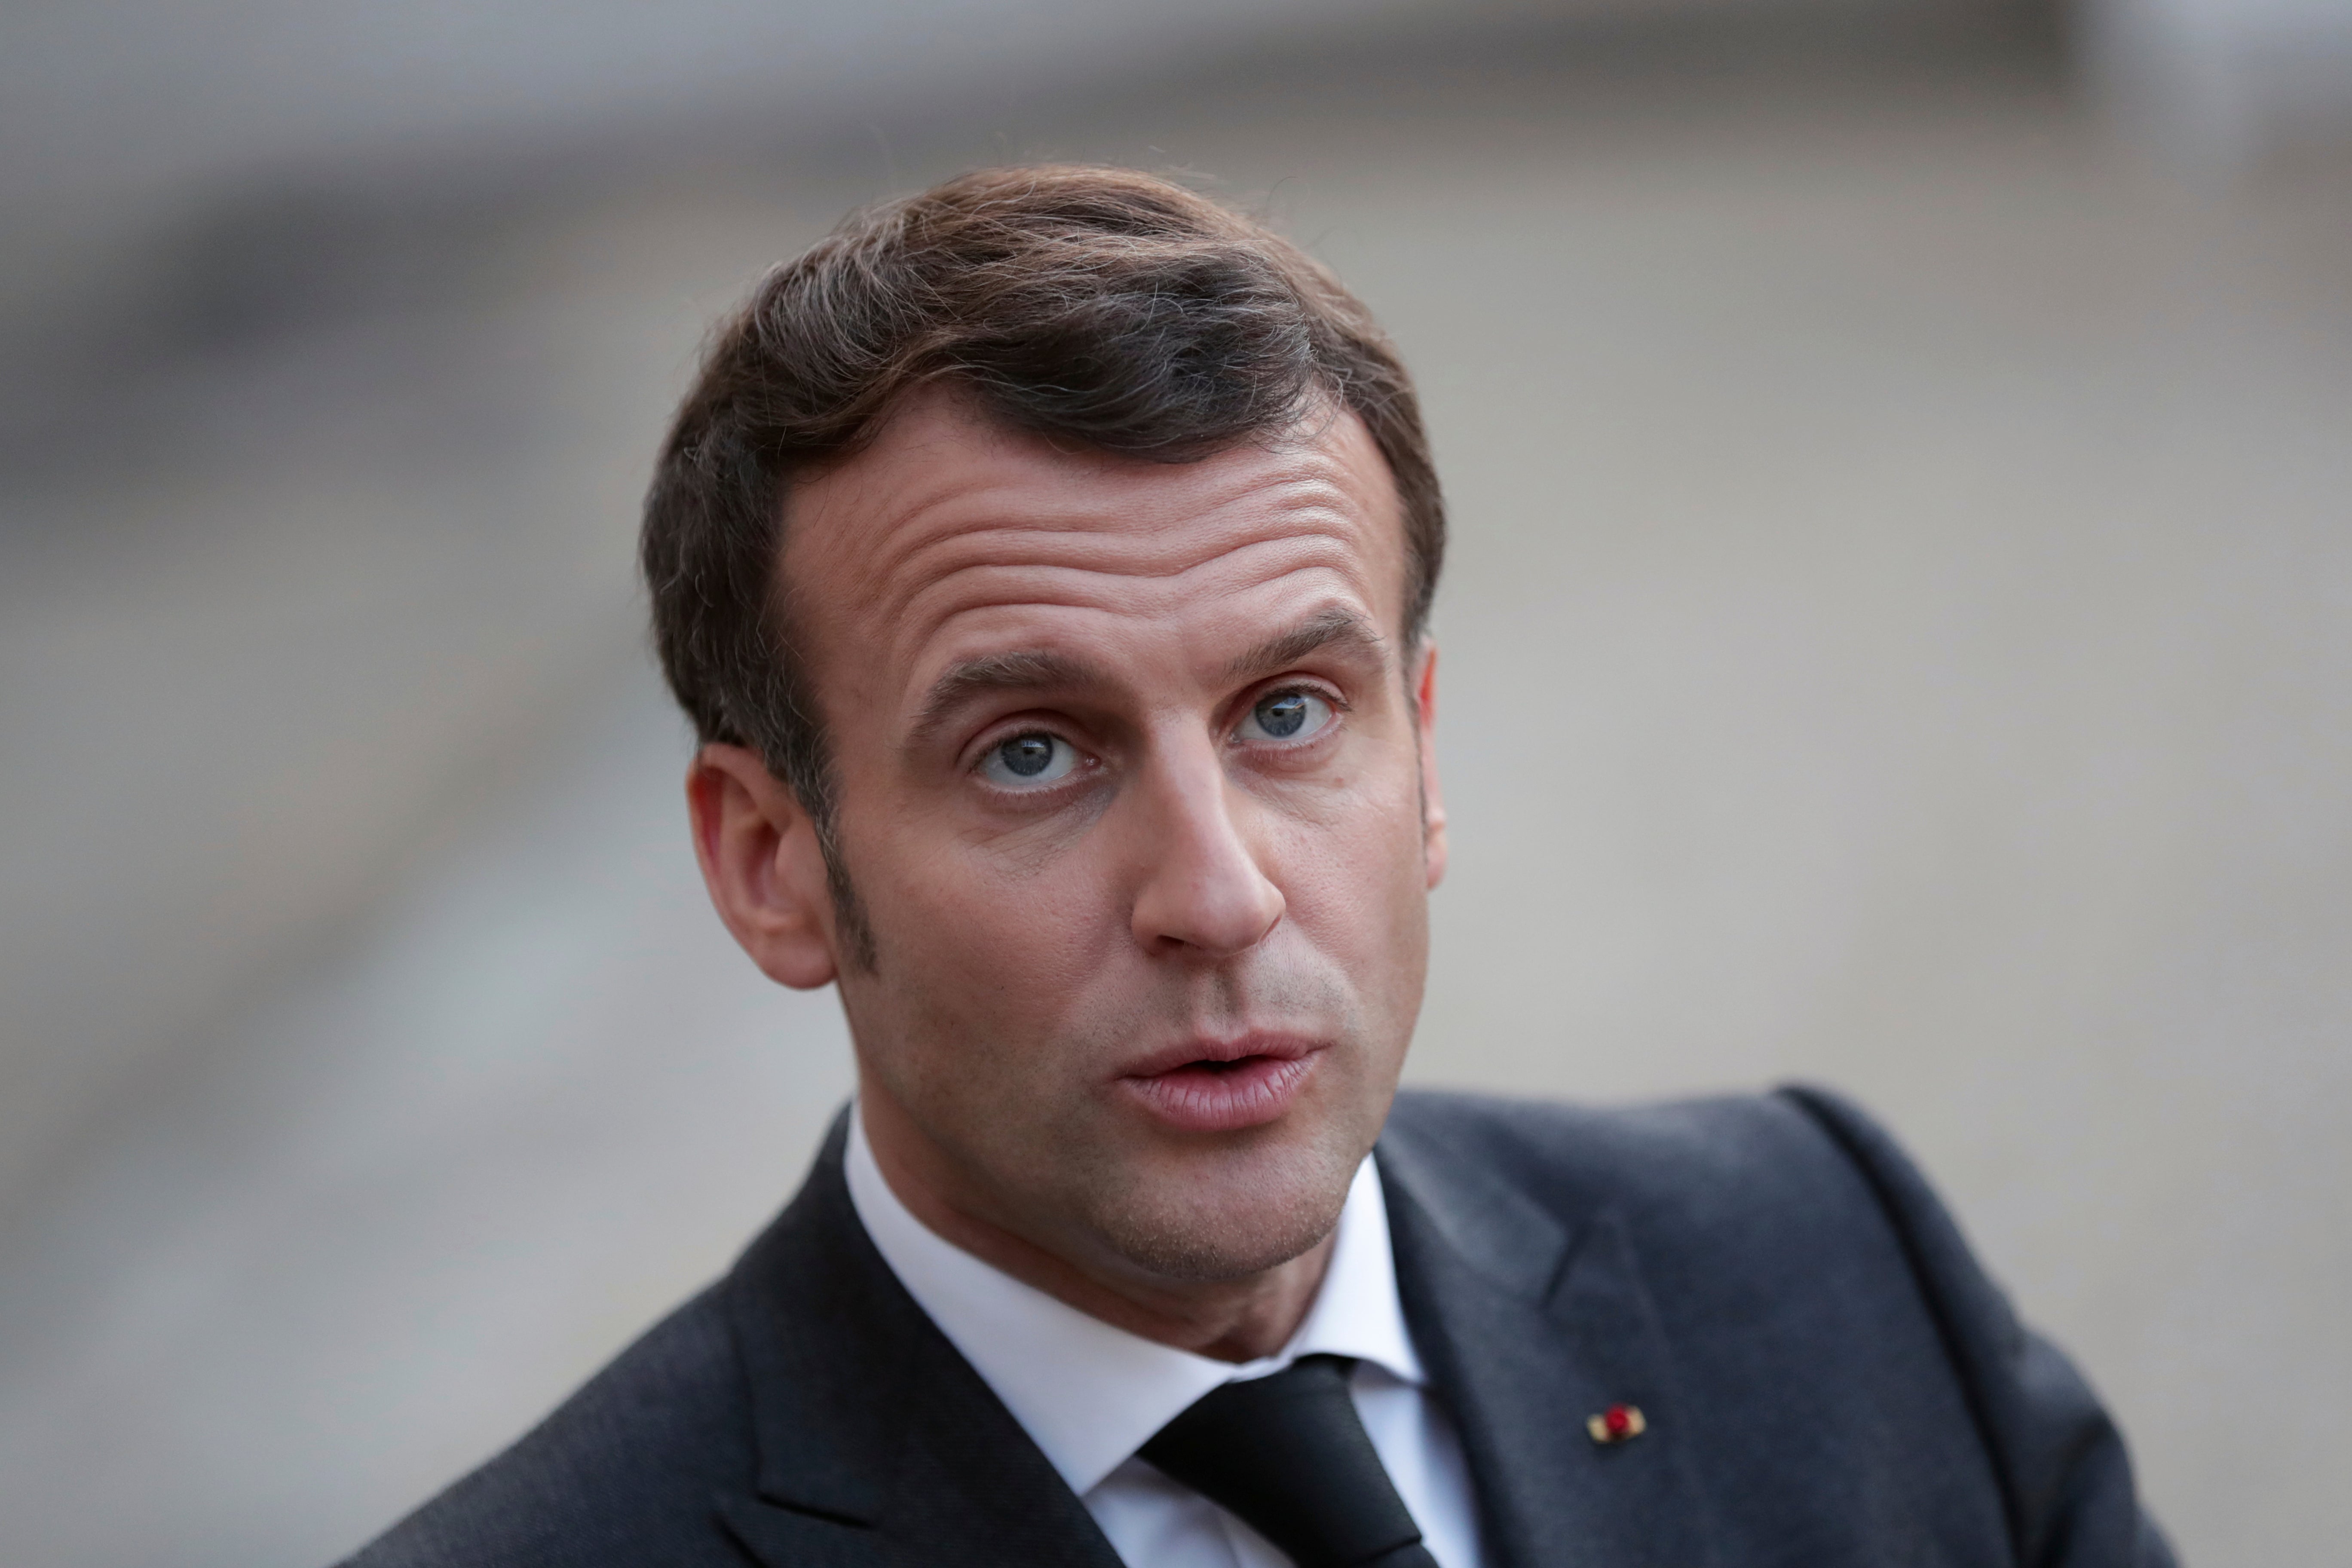 Emmanuel Macron has backed a plan by the European Commission allowing tougher restrictions on exports